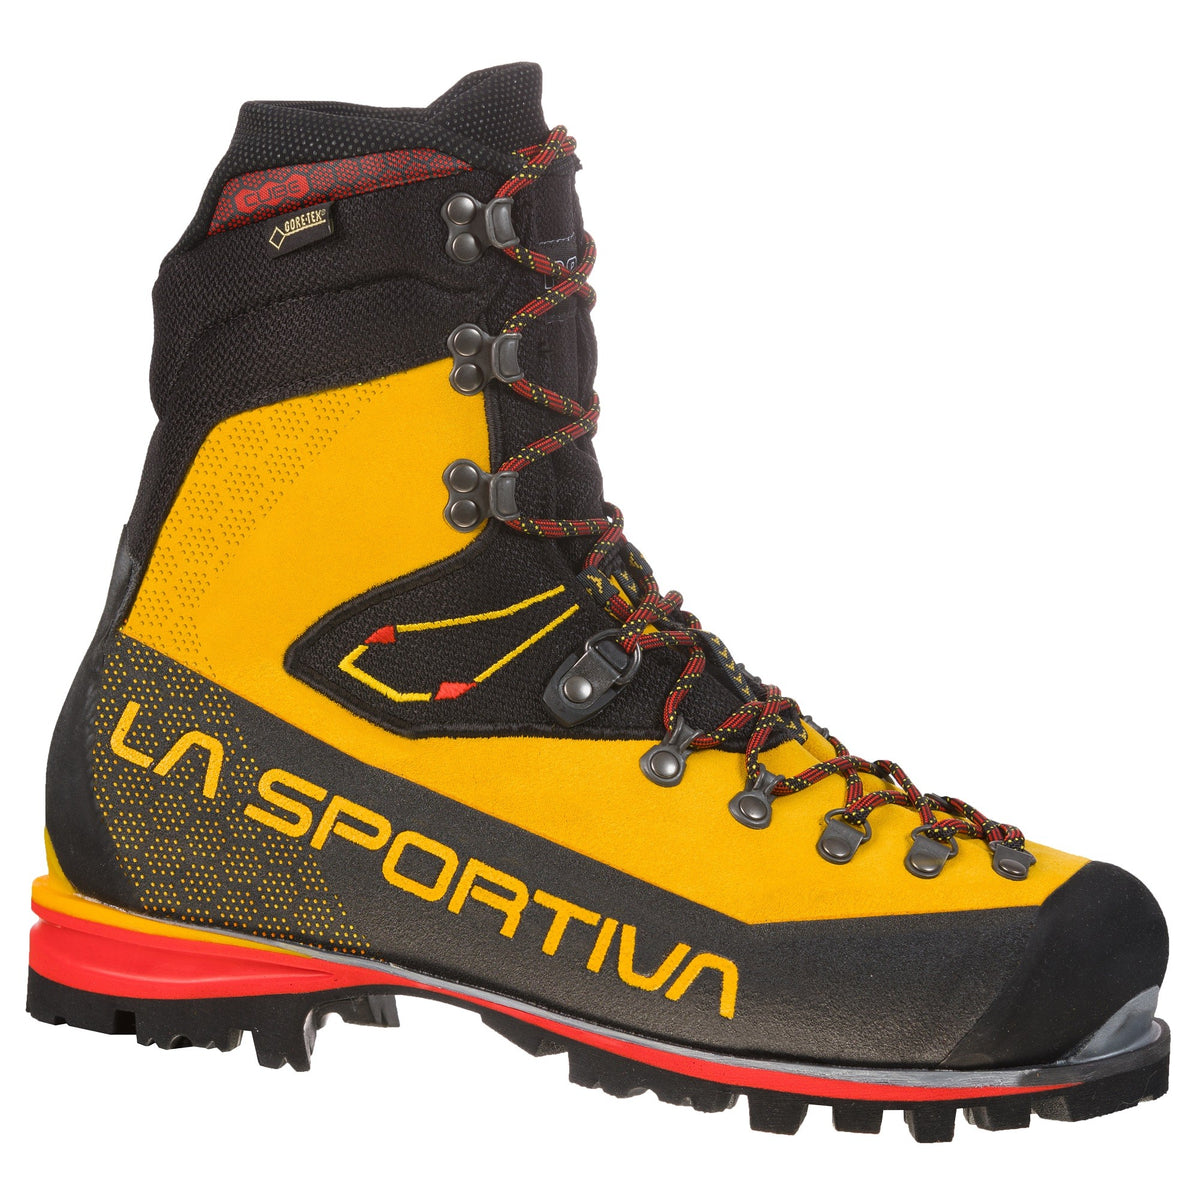 La Sportiva Nepal Cube GTX in Yellow, Black and Red